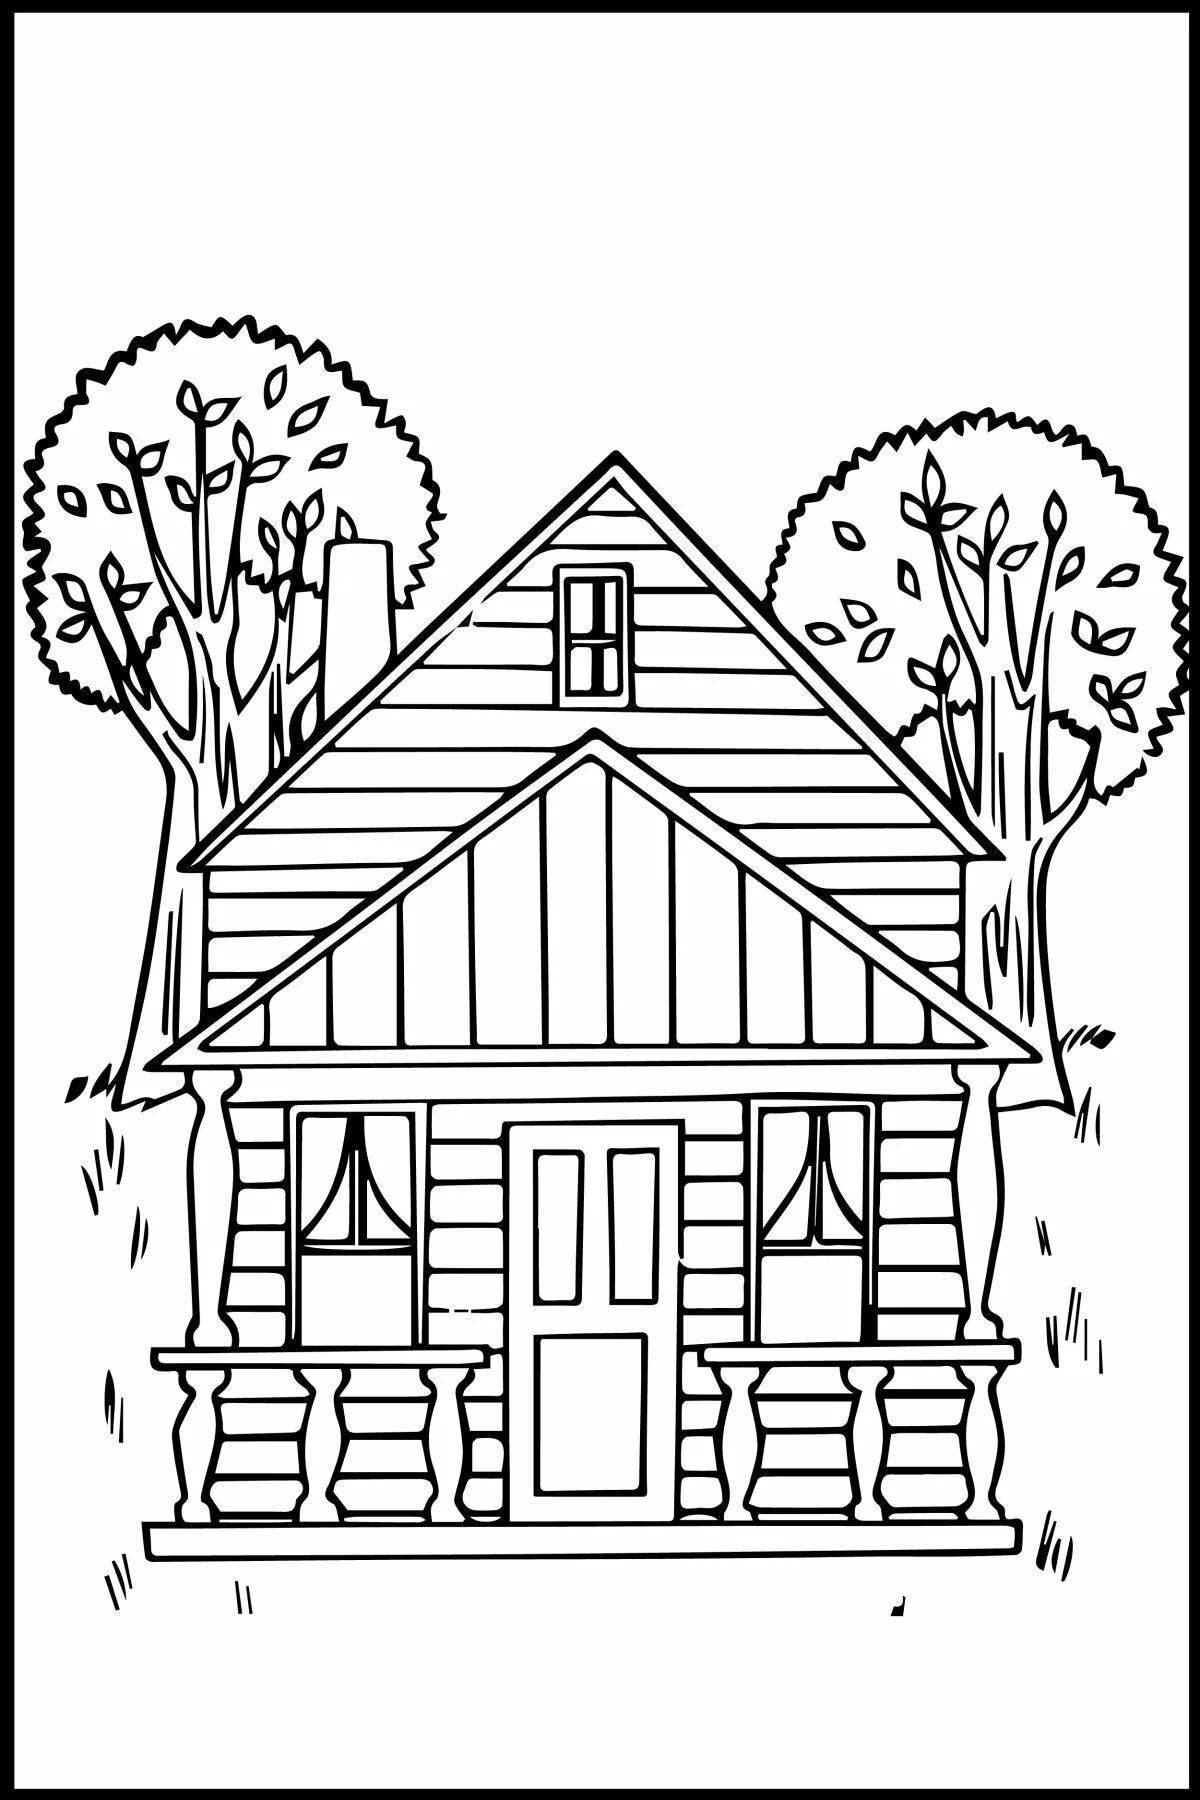 Coloring country house for children